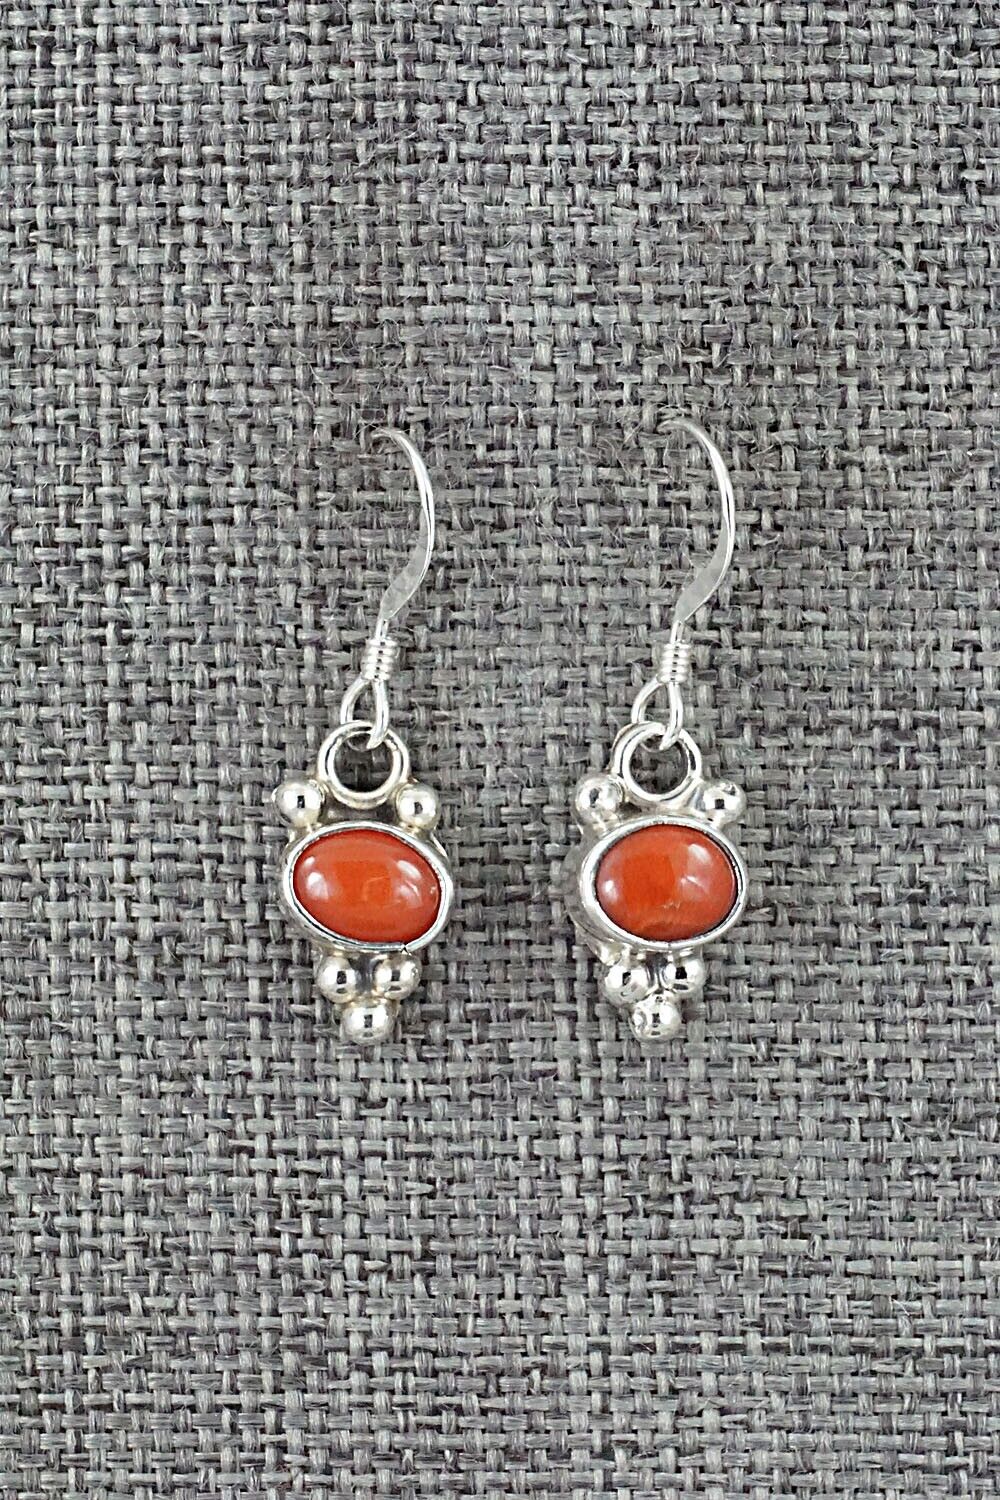 Coral & Sterling Silver Earrings - Annie Spencer